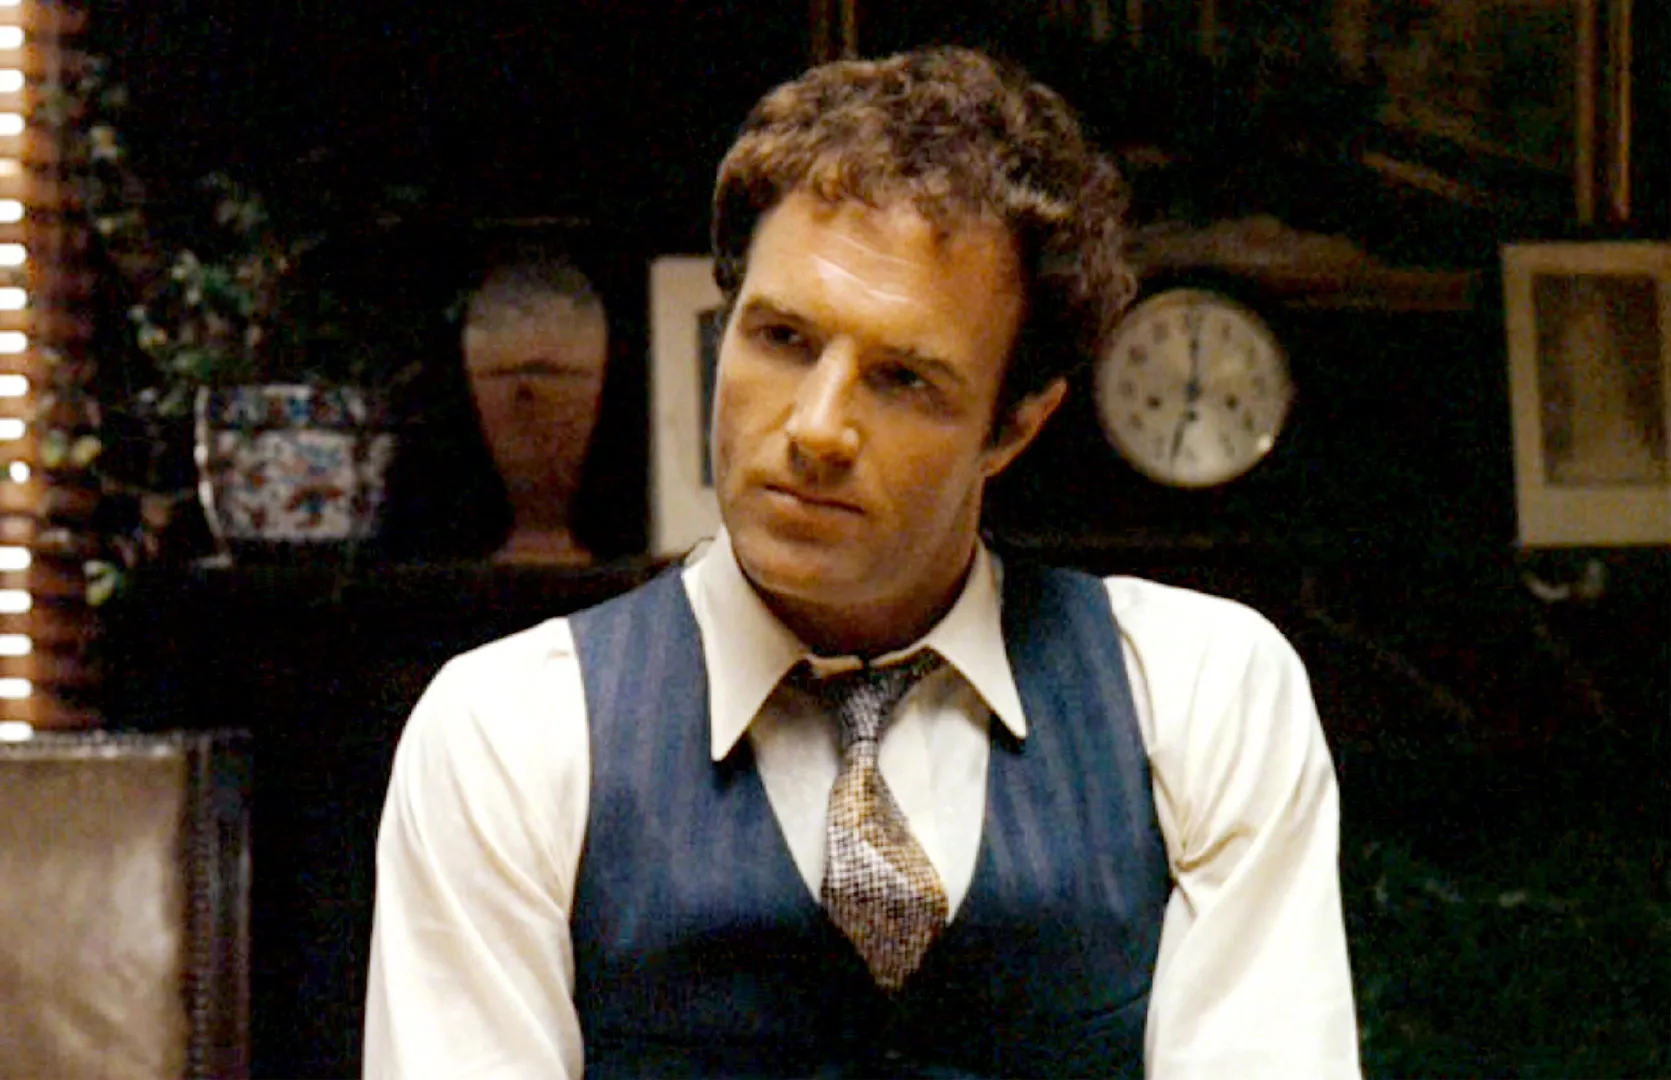 Veteran actor James Caan dies at 82, 'The Godfather' cast misses him and 'Sonny' | FMV6